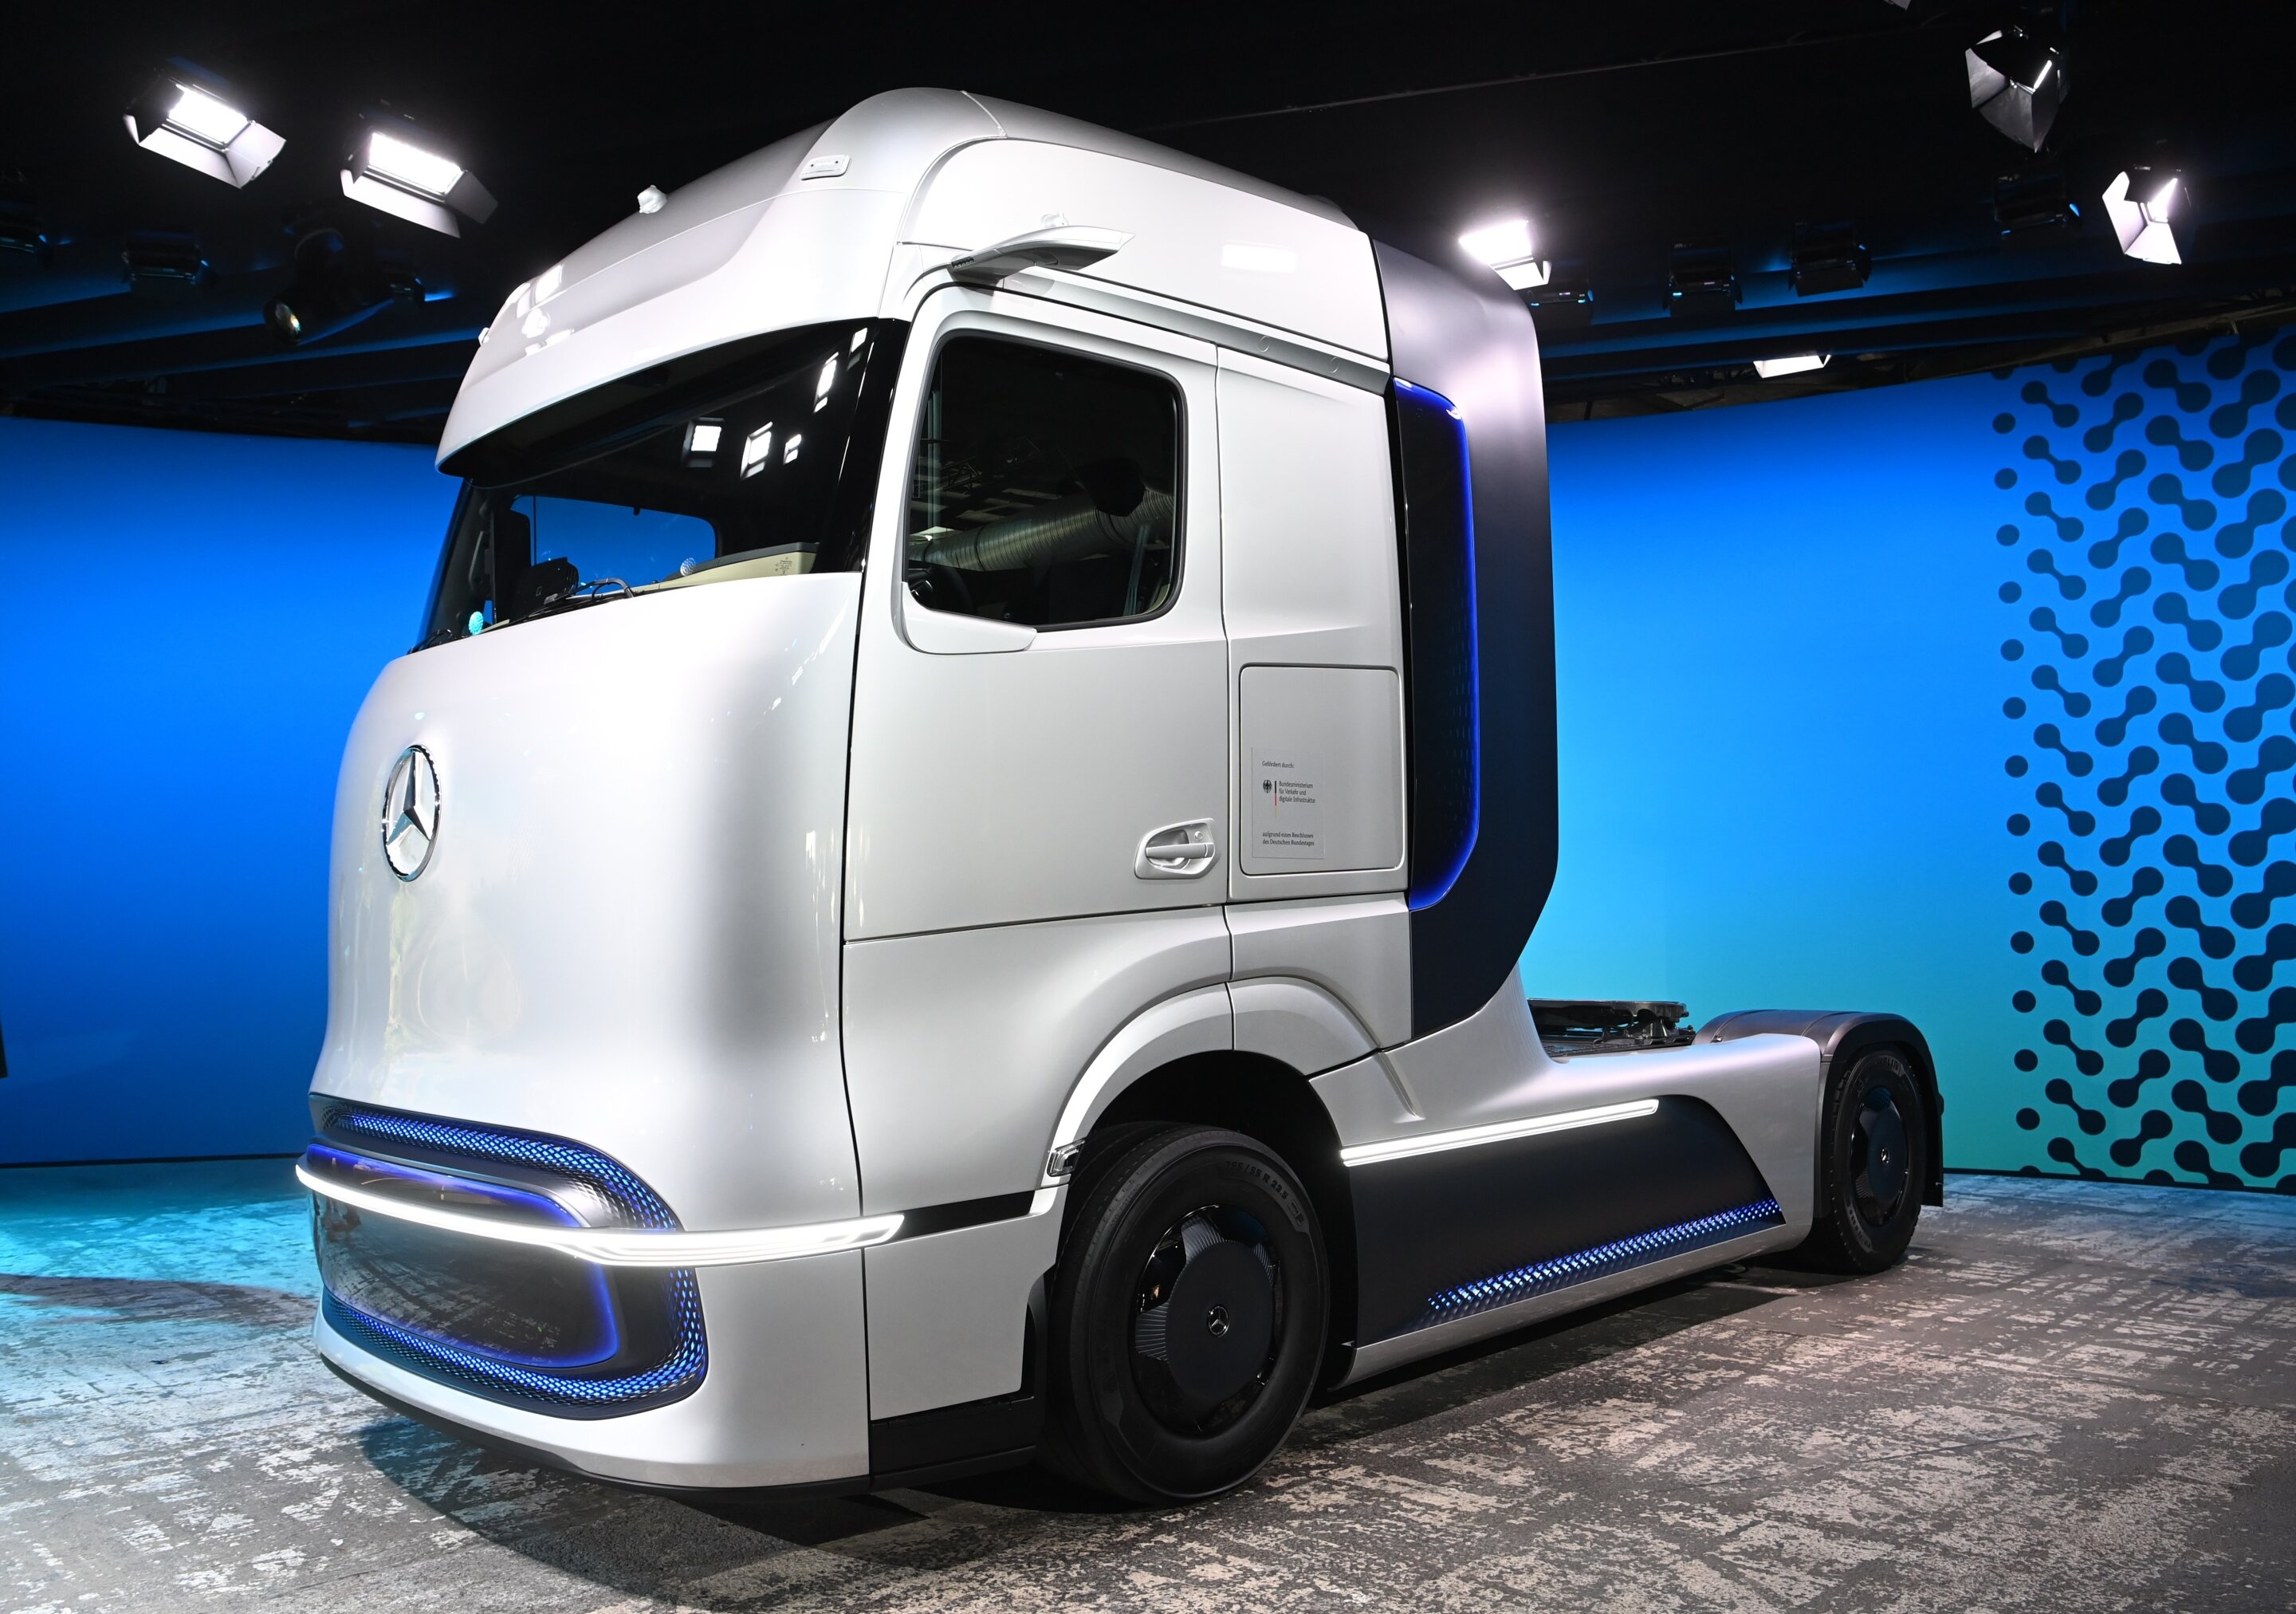 Daimler Truck says batteries, hydrogen are the future